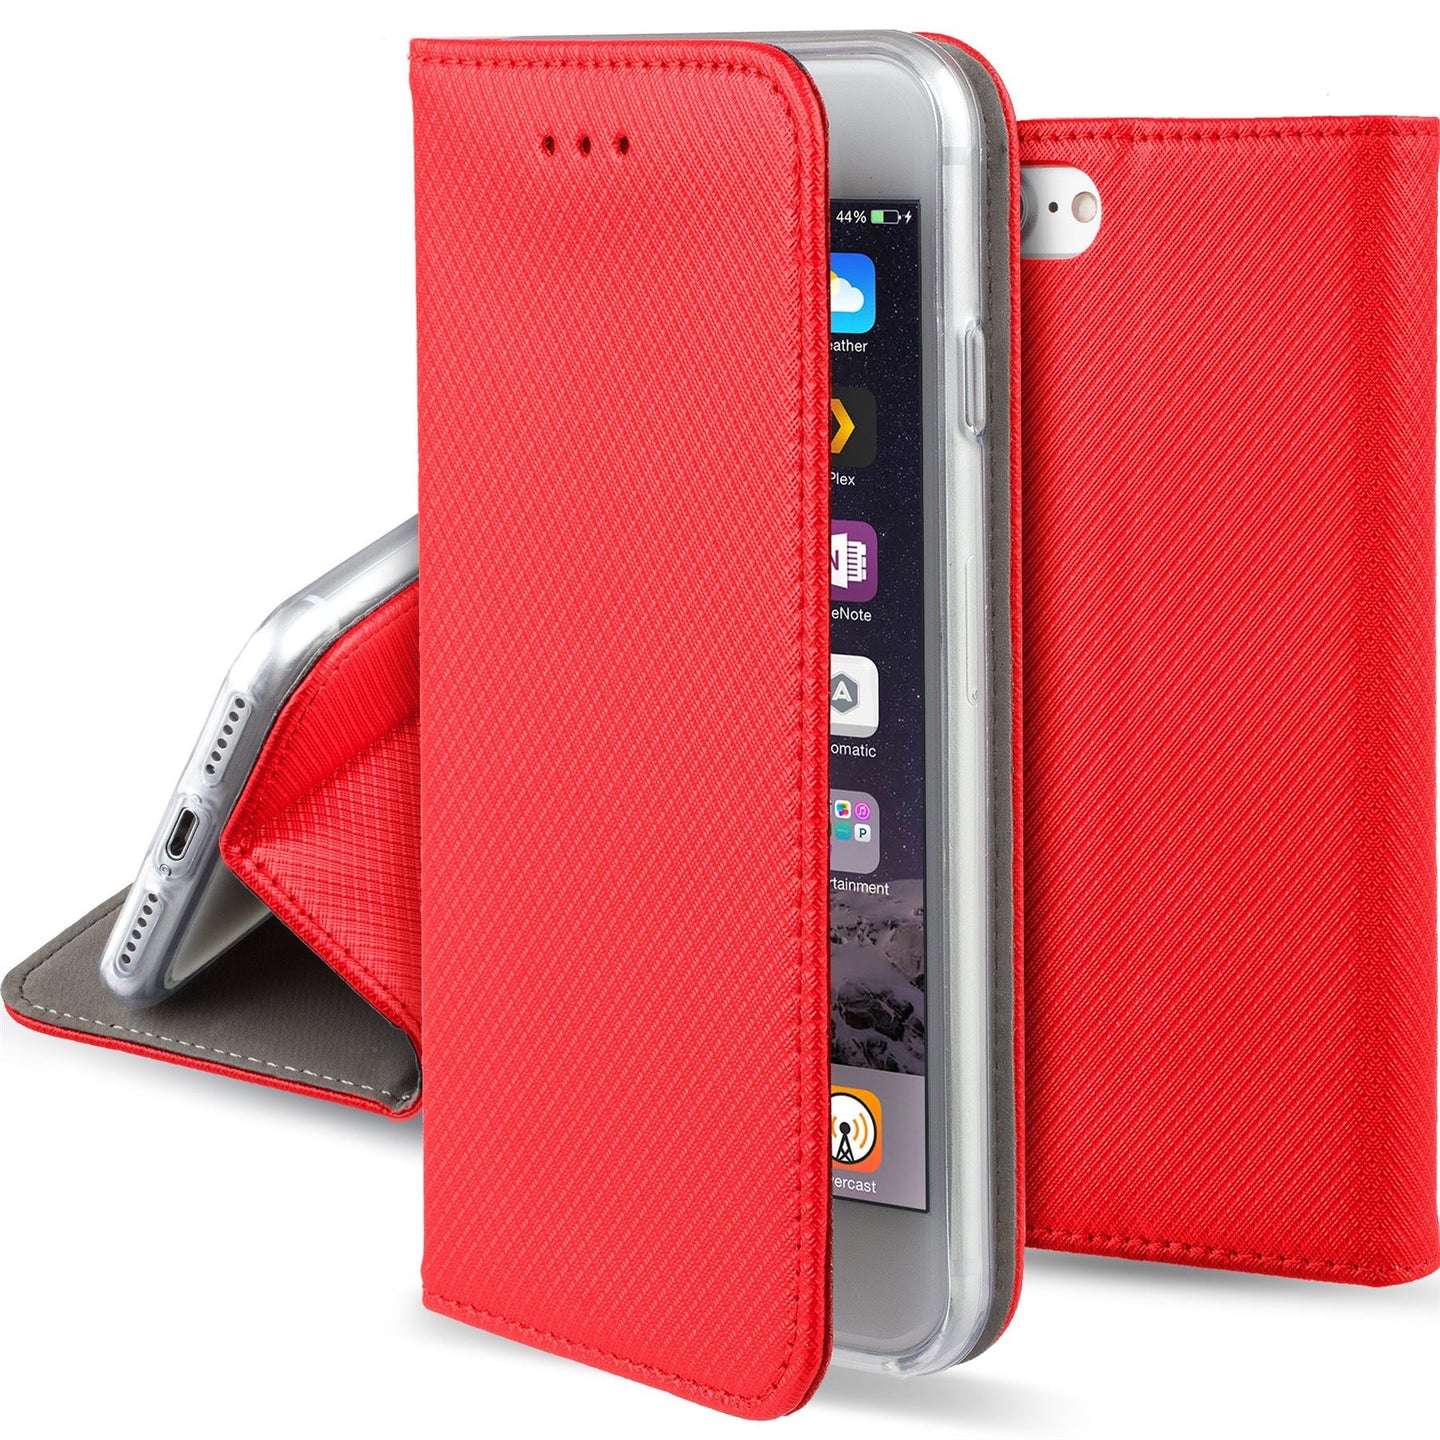 Moozy Case Flip Cover for iPhone SE, iPhone 5s, Red - Smart Magnetic Flip Case with Card Holder and Stand